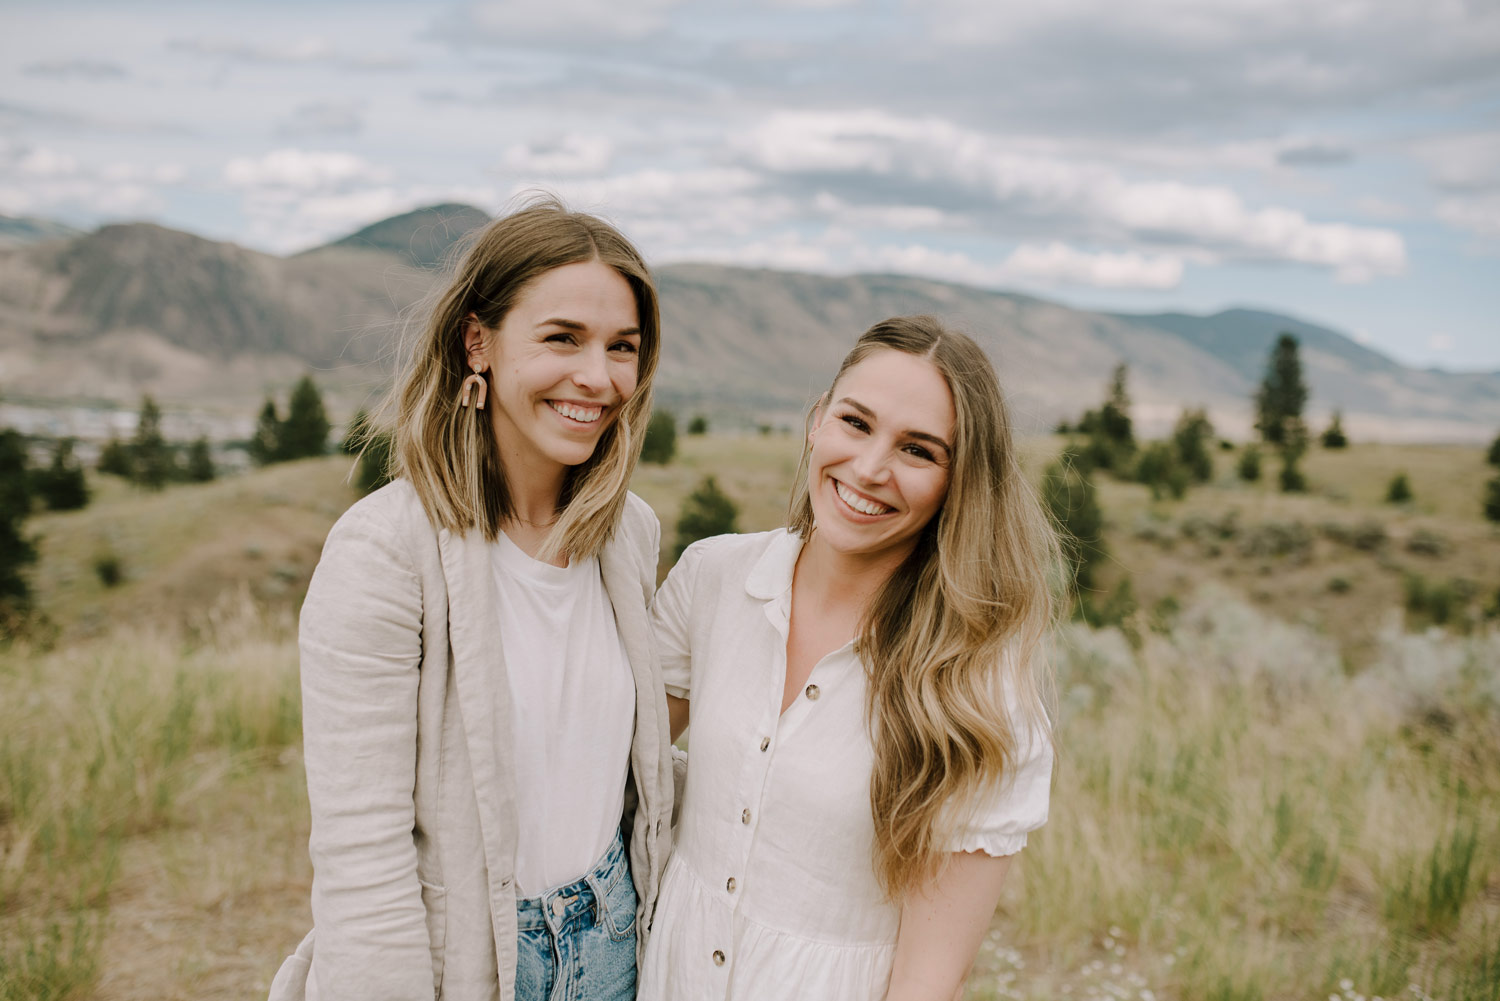 bria gatien and her friend hug each other and smile with kamloops bc rolling hills in the background during a branding photography session with meet pepper